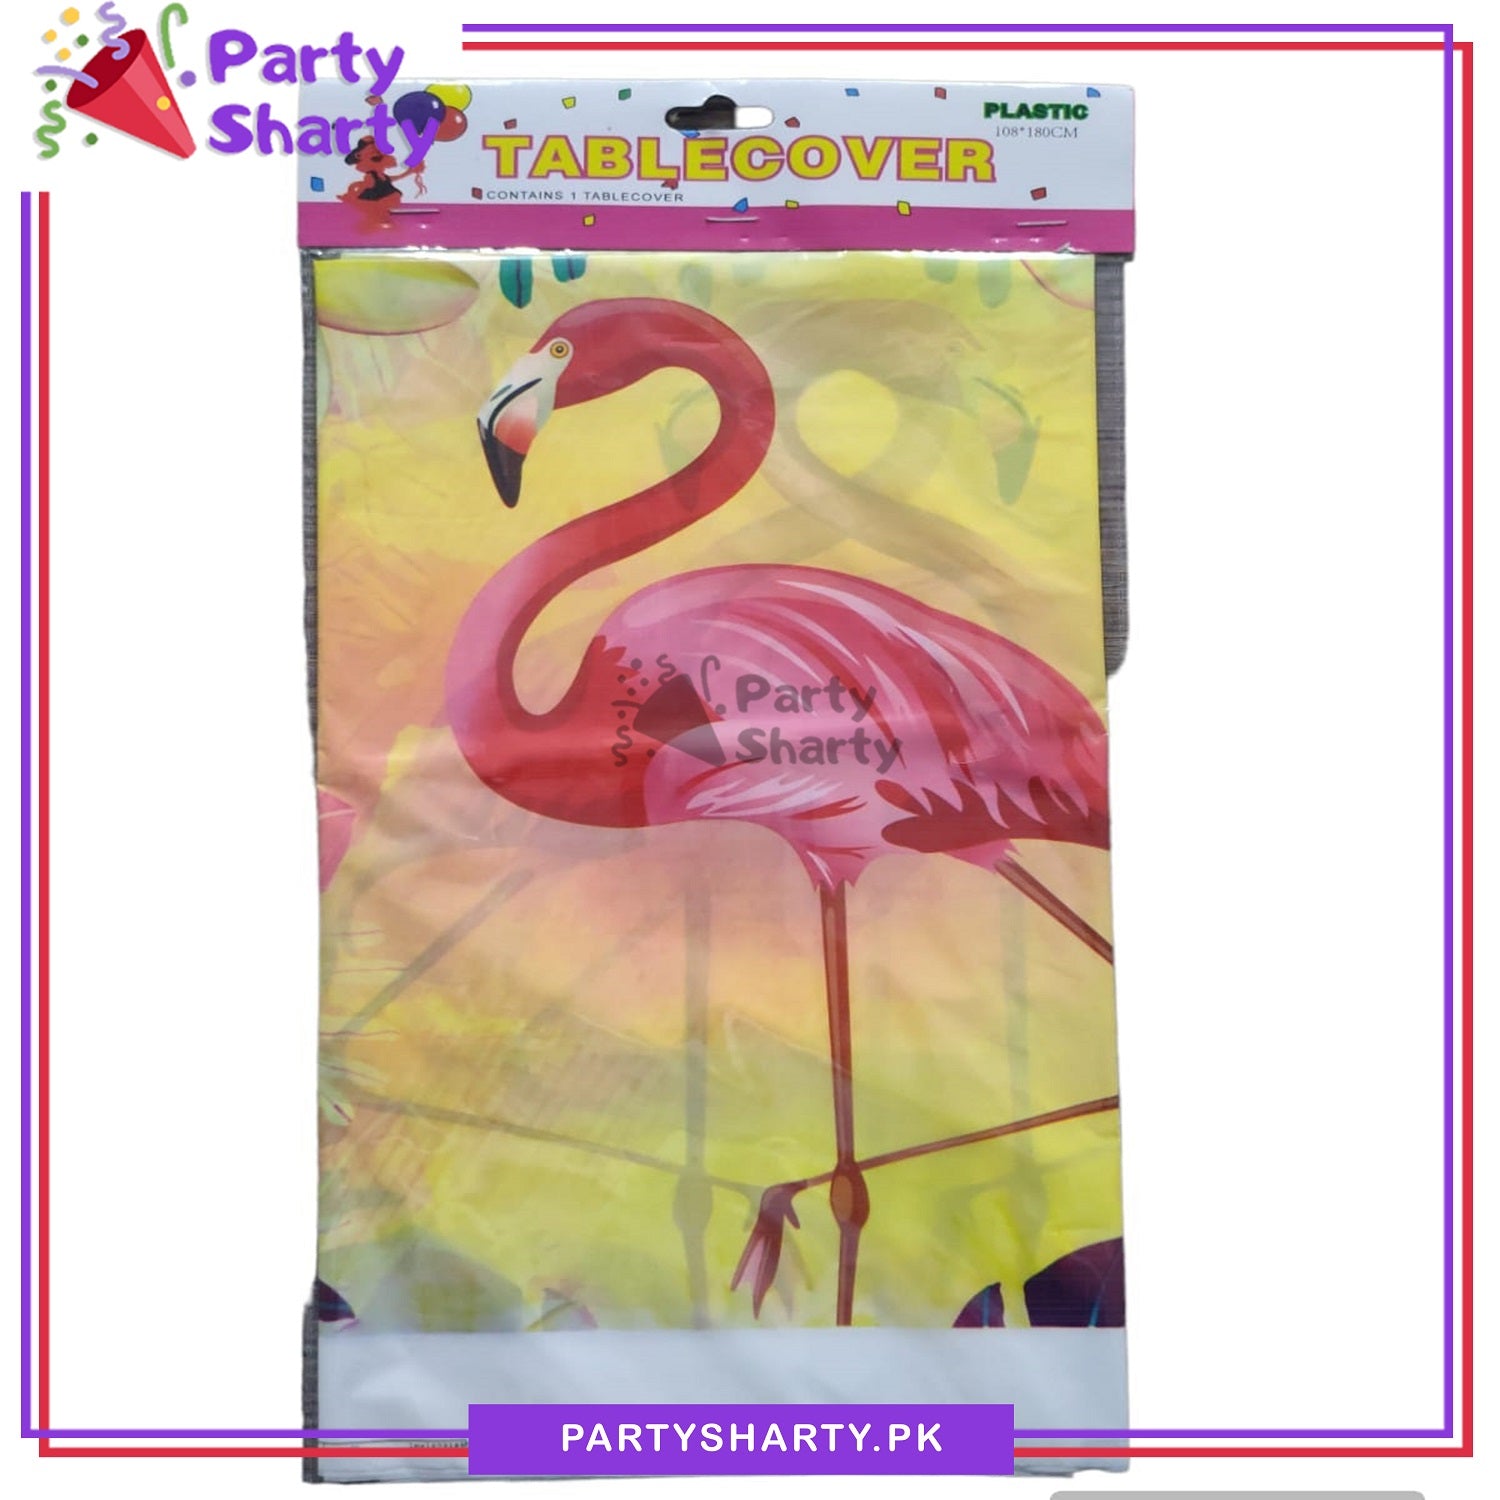 D-2 Flamingo Party Theme Table Cover for Birthday Party and Decoration